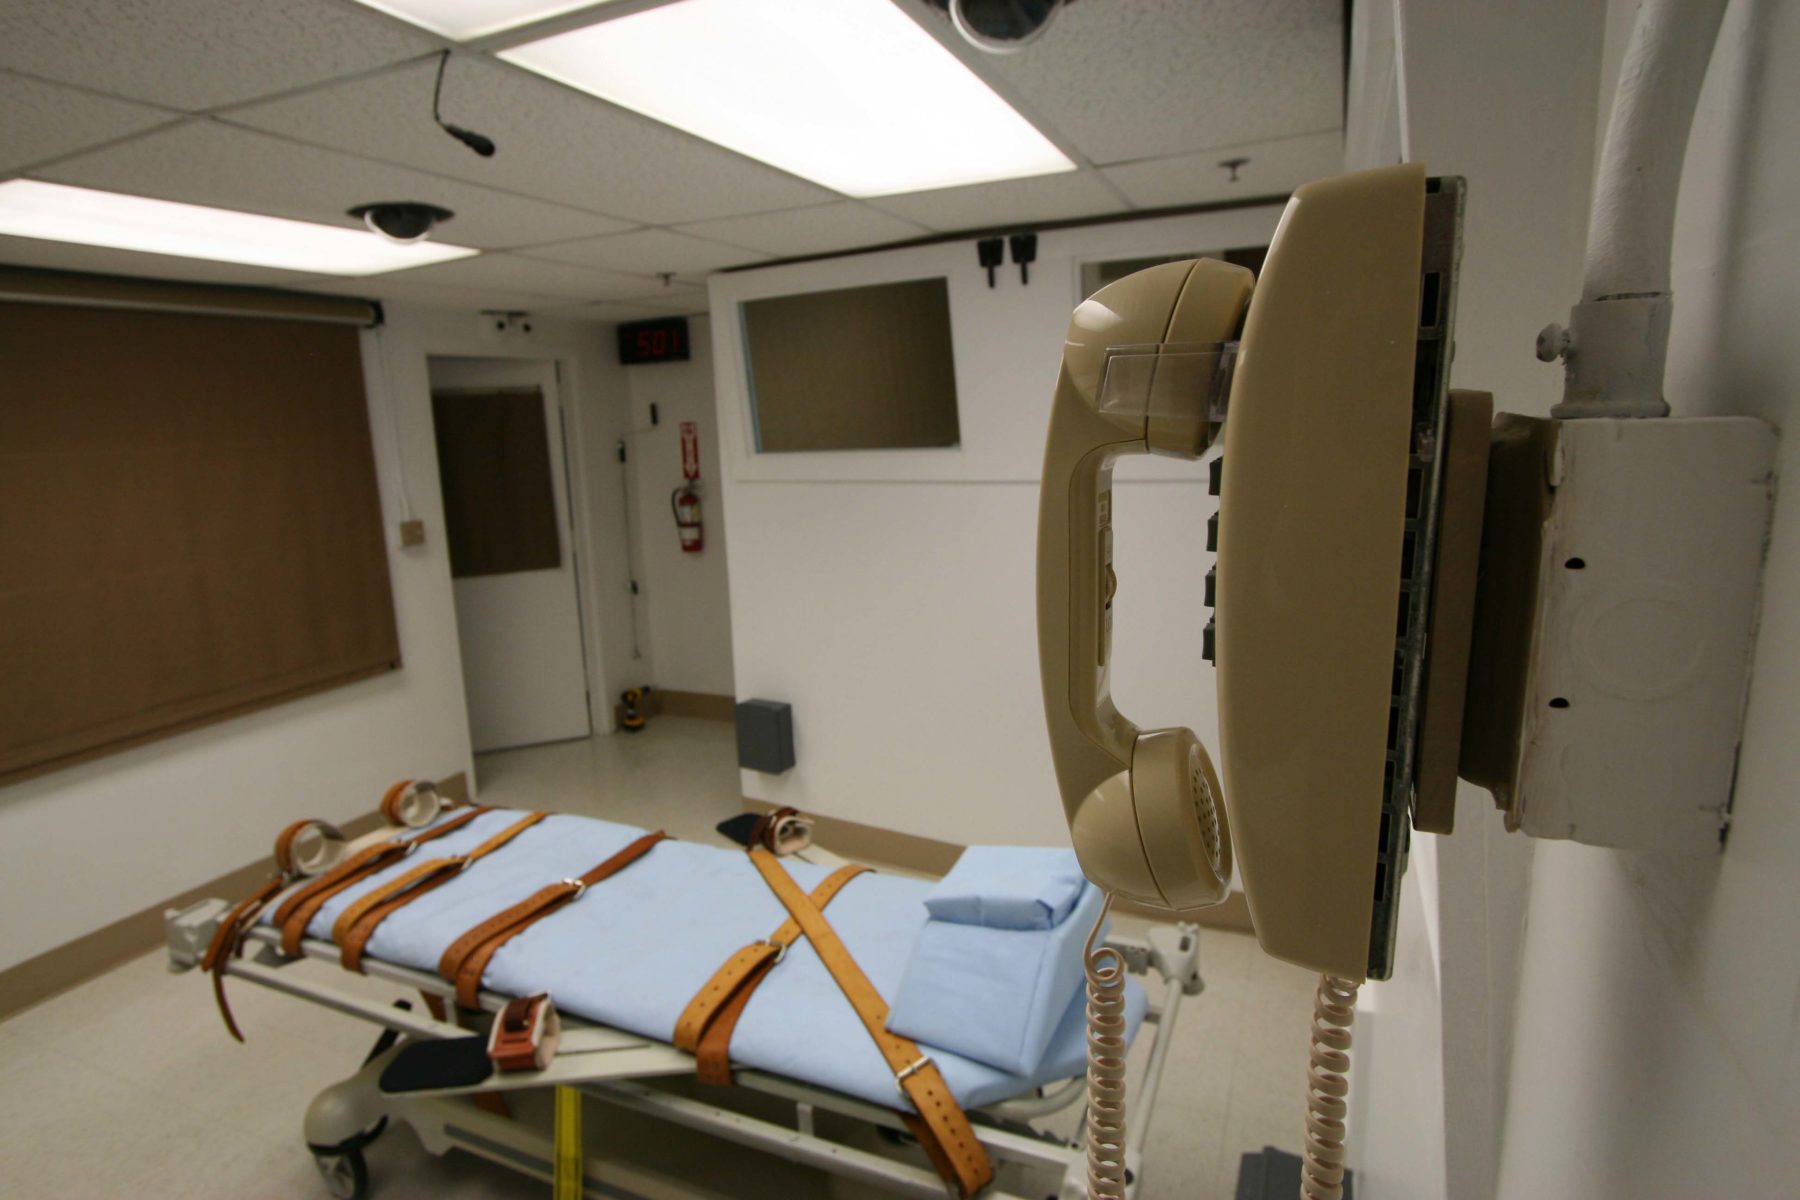 Florida Death Penalty Found Unconstitutional: What Happens Next?